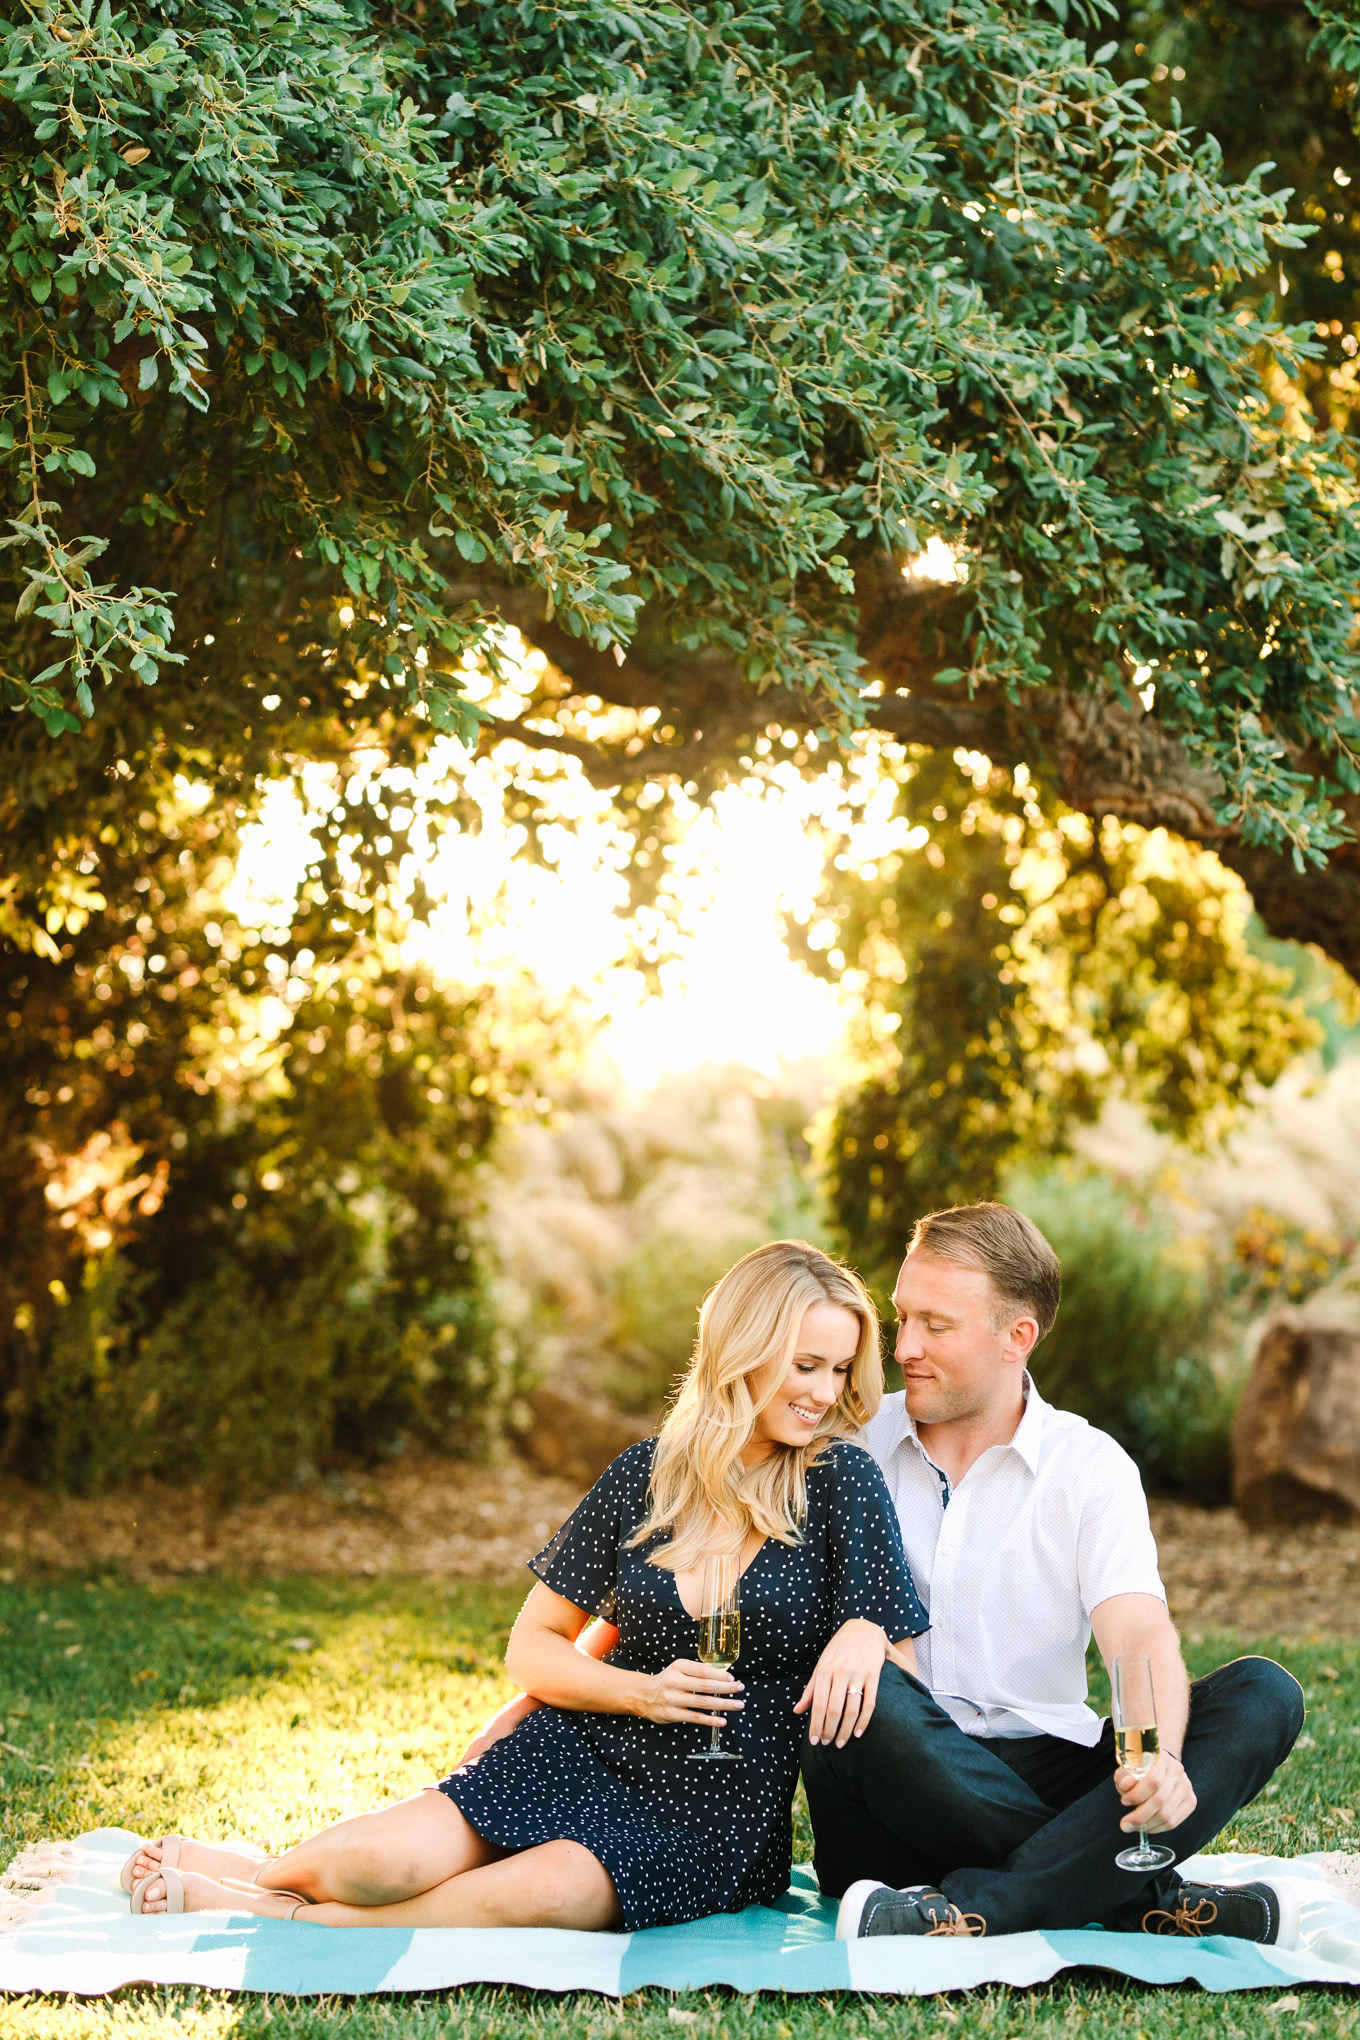 Engagement picnic at Quail Ranch Simi Valley | Best Southern California Garden Wedding Venues | Colorful and elevated wedding photography for fun-loving couples | #gardenvenue #weddingvenue #socalweddingvenue #bouquetideas #uniquebouquet   Source: Mary Costa Photography | Los Angeles 